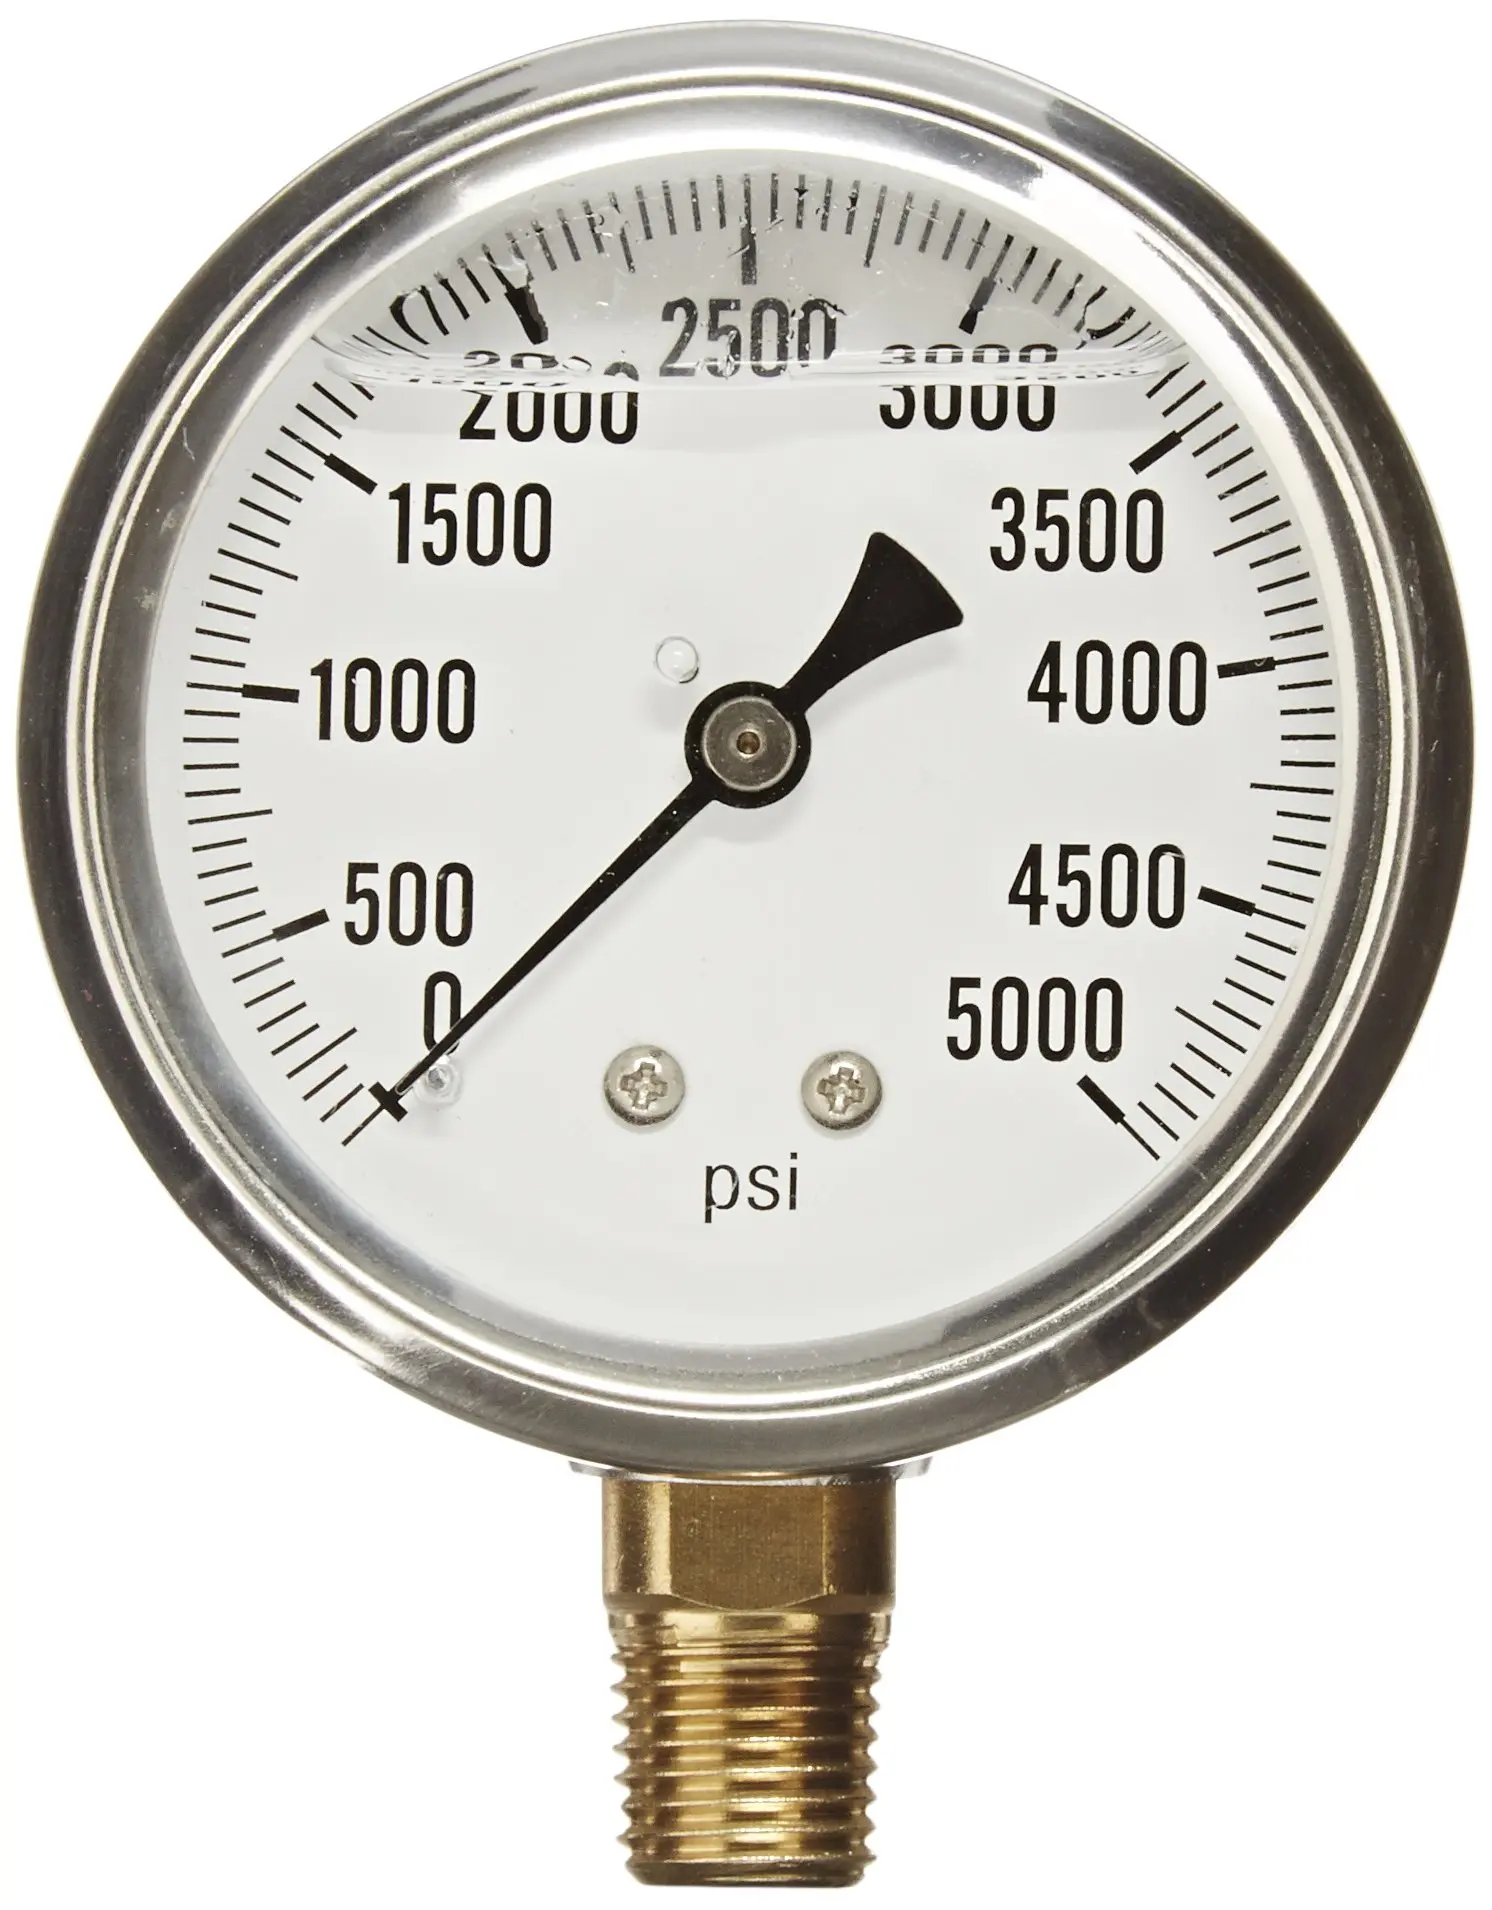 2-1/2 Dial Size PIC Gauge PRO-202L-254P Glycerin Filled Industrial Center Back Mount Pressure Gauge with Stainless Steel Case 0/3000 psi Brass Internals Plastic Lens 1/4 Male NPT